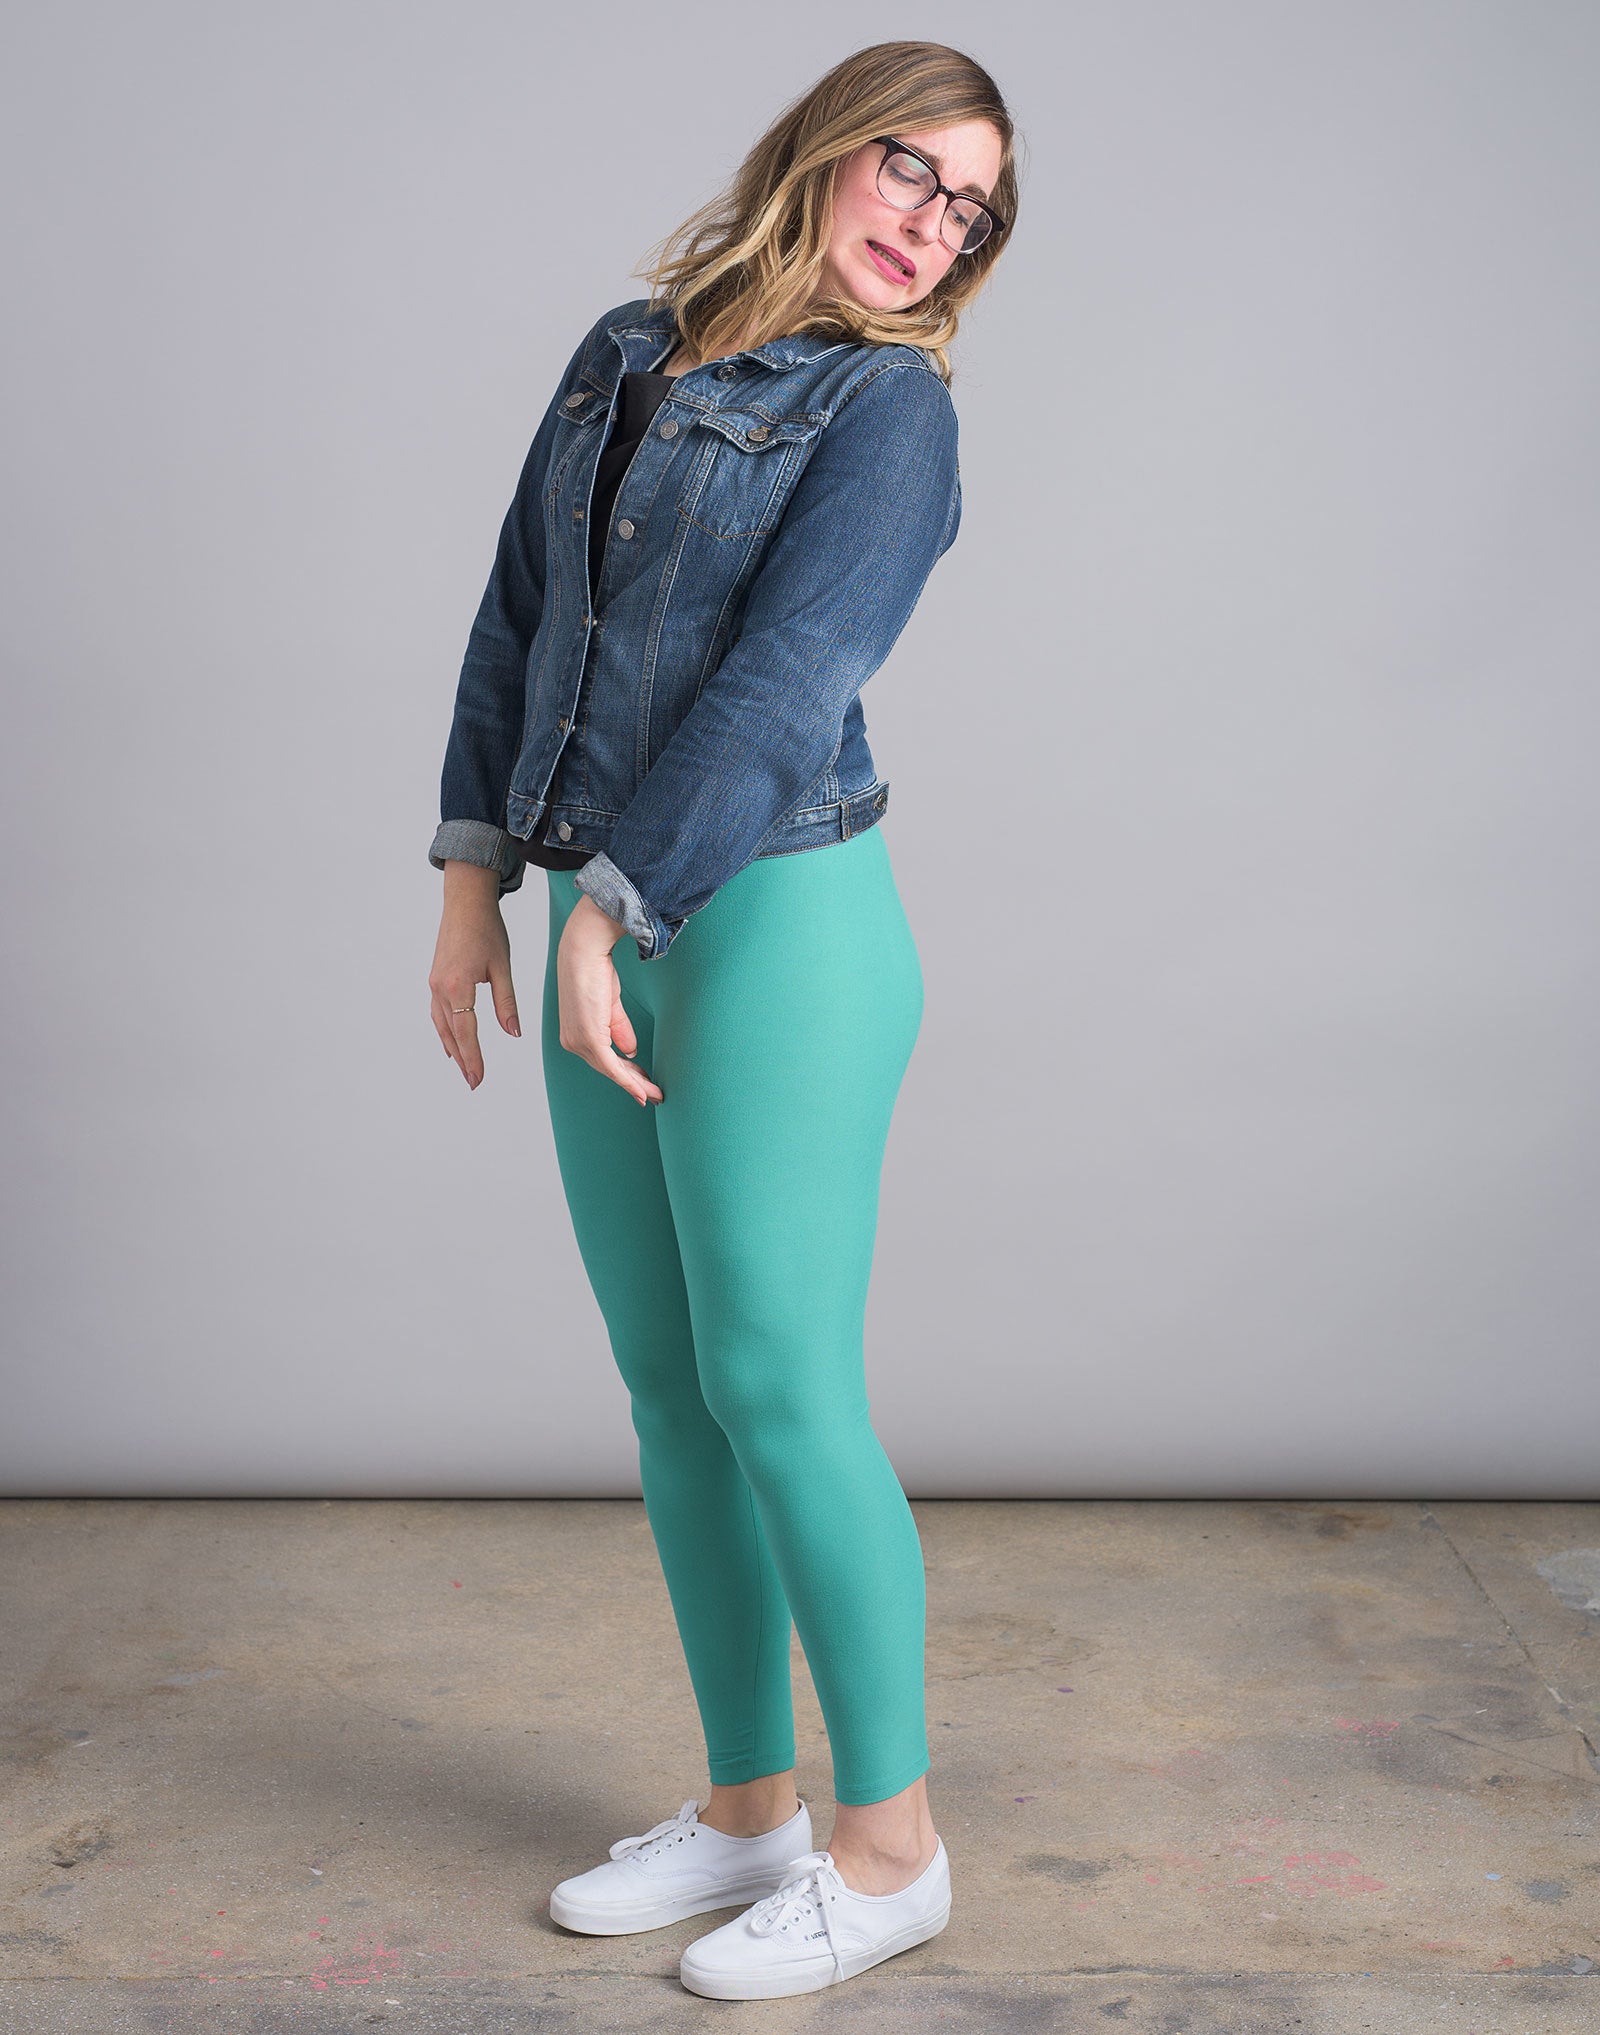 Exceptionally Stylish Lularoe Leggings at Low Prices 